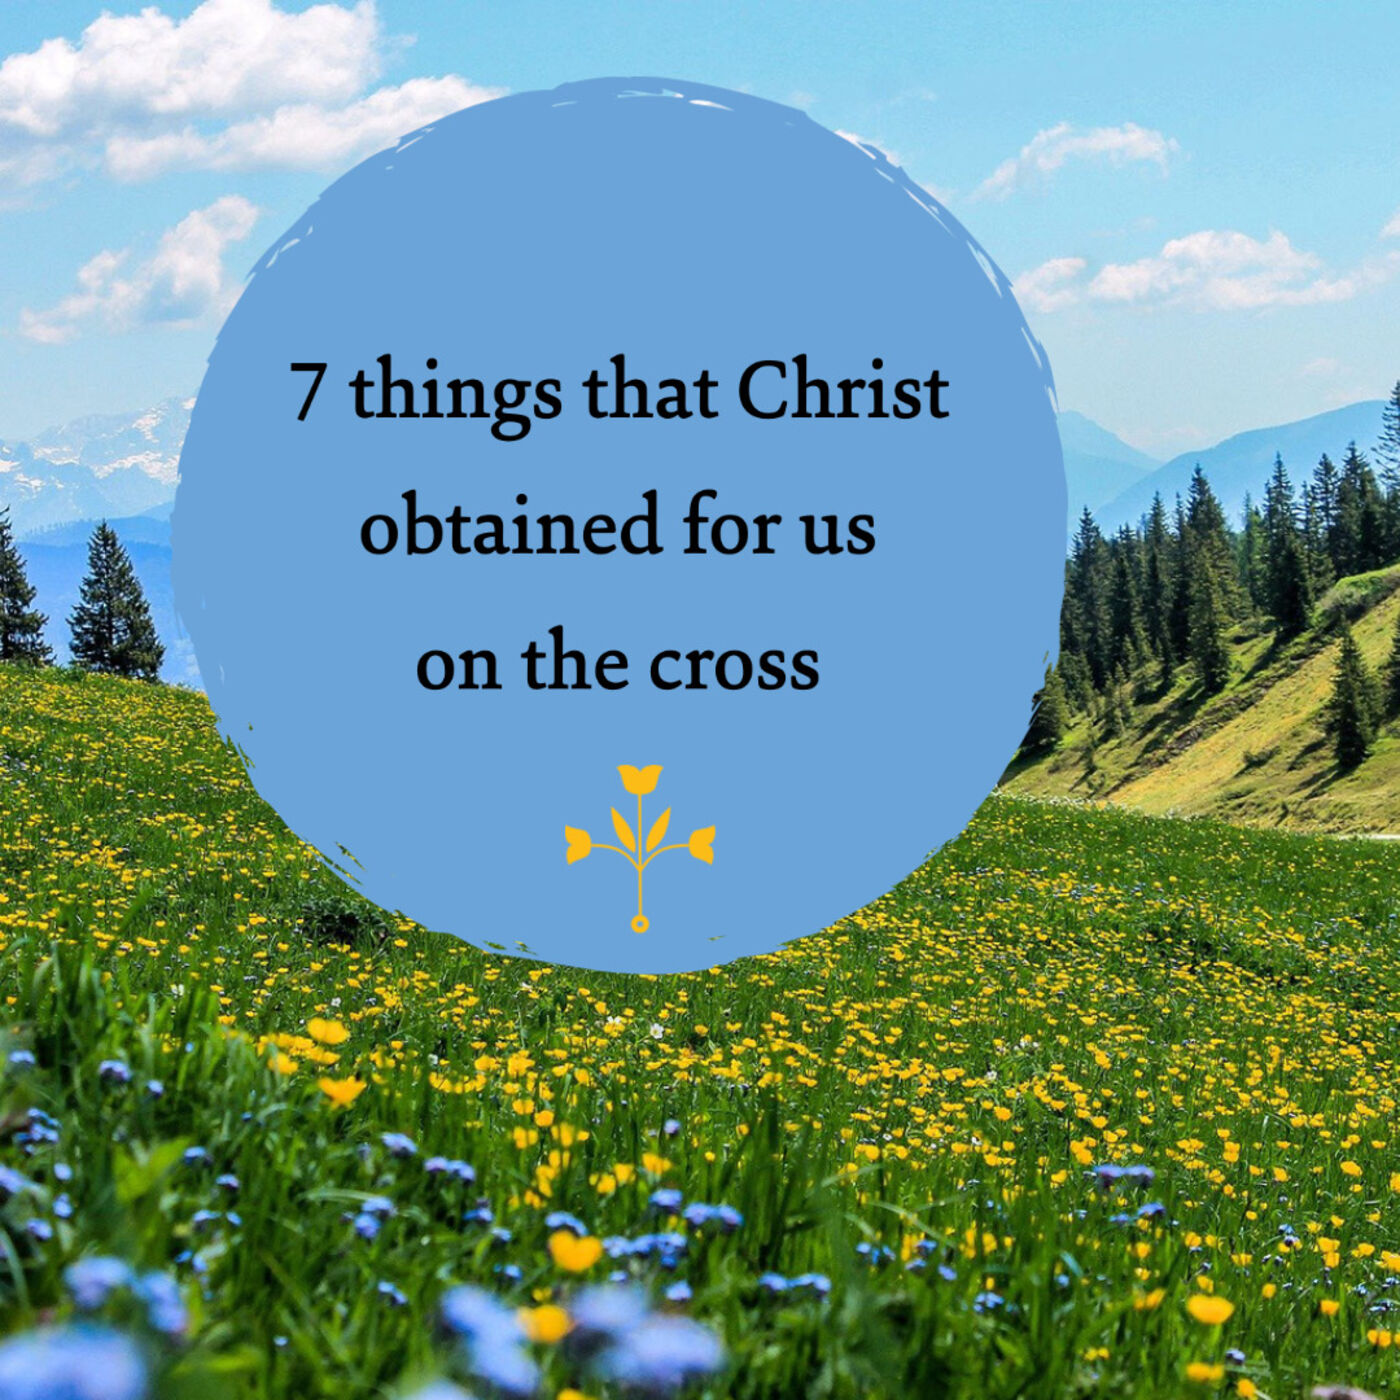 7 things that Christ obtained for us on the cross